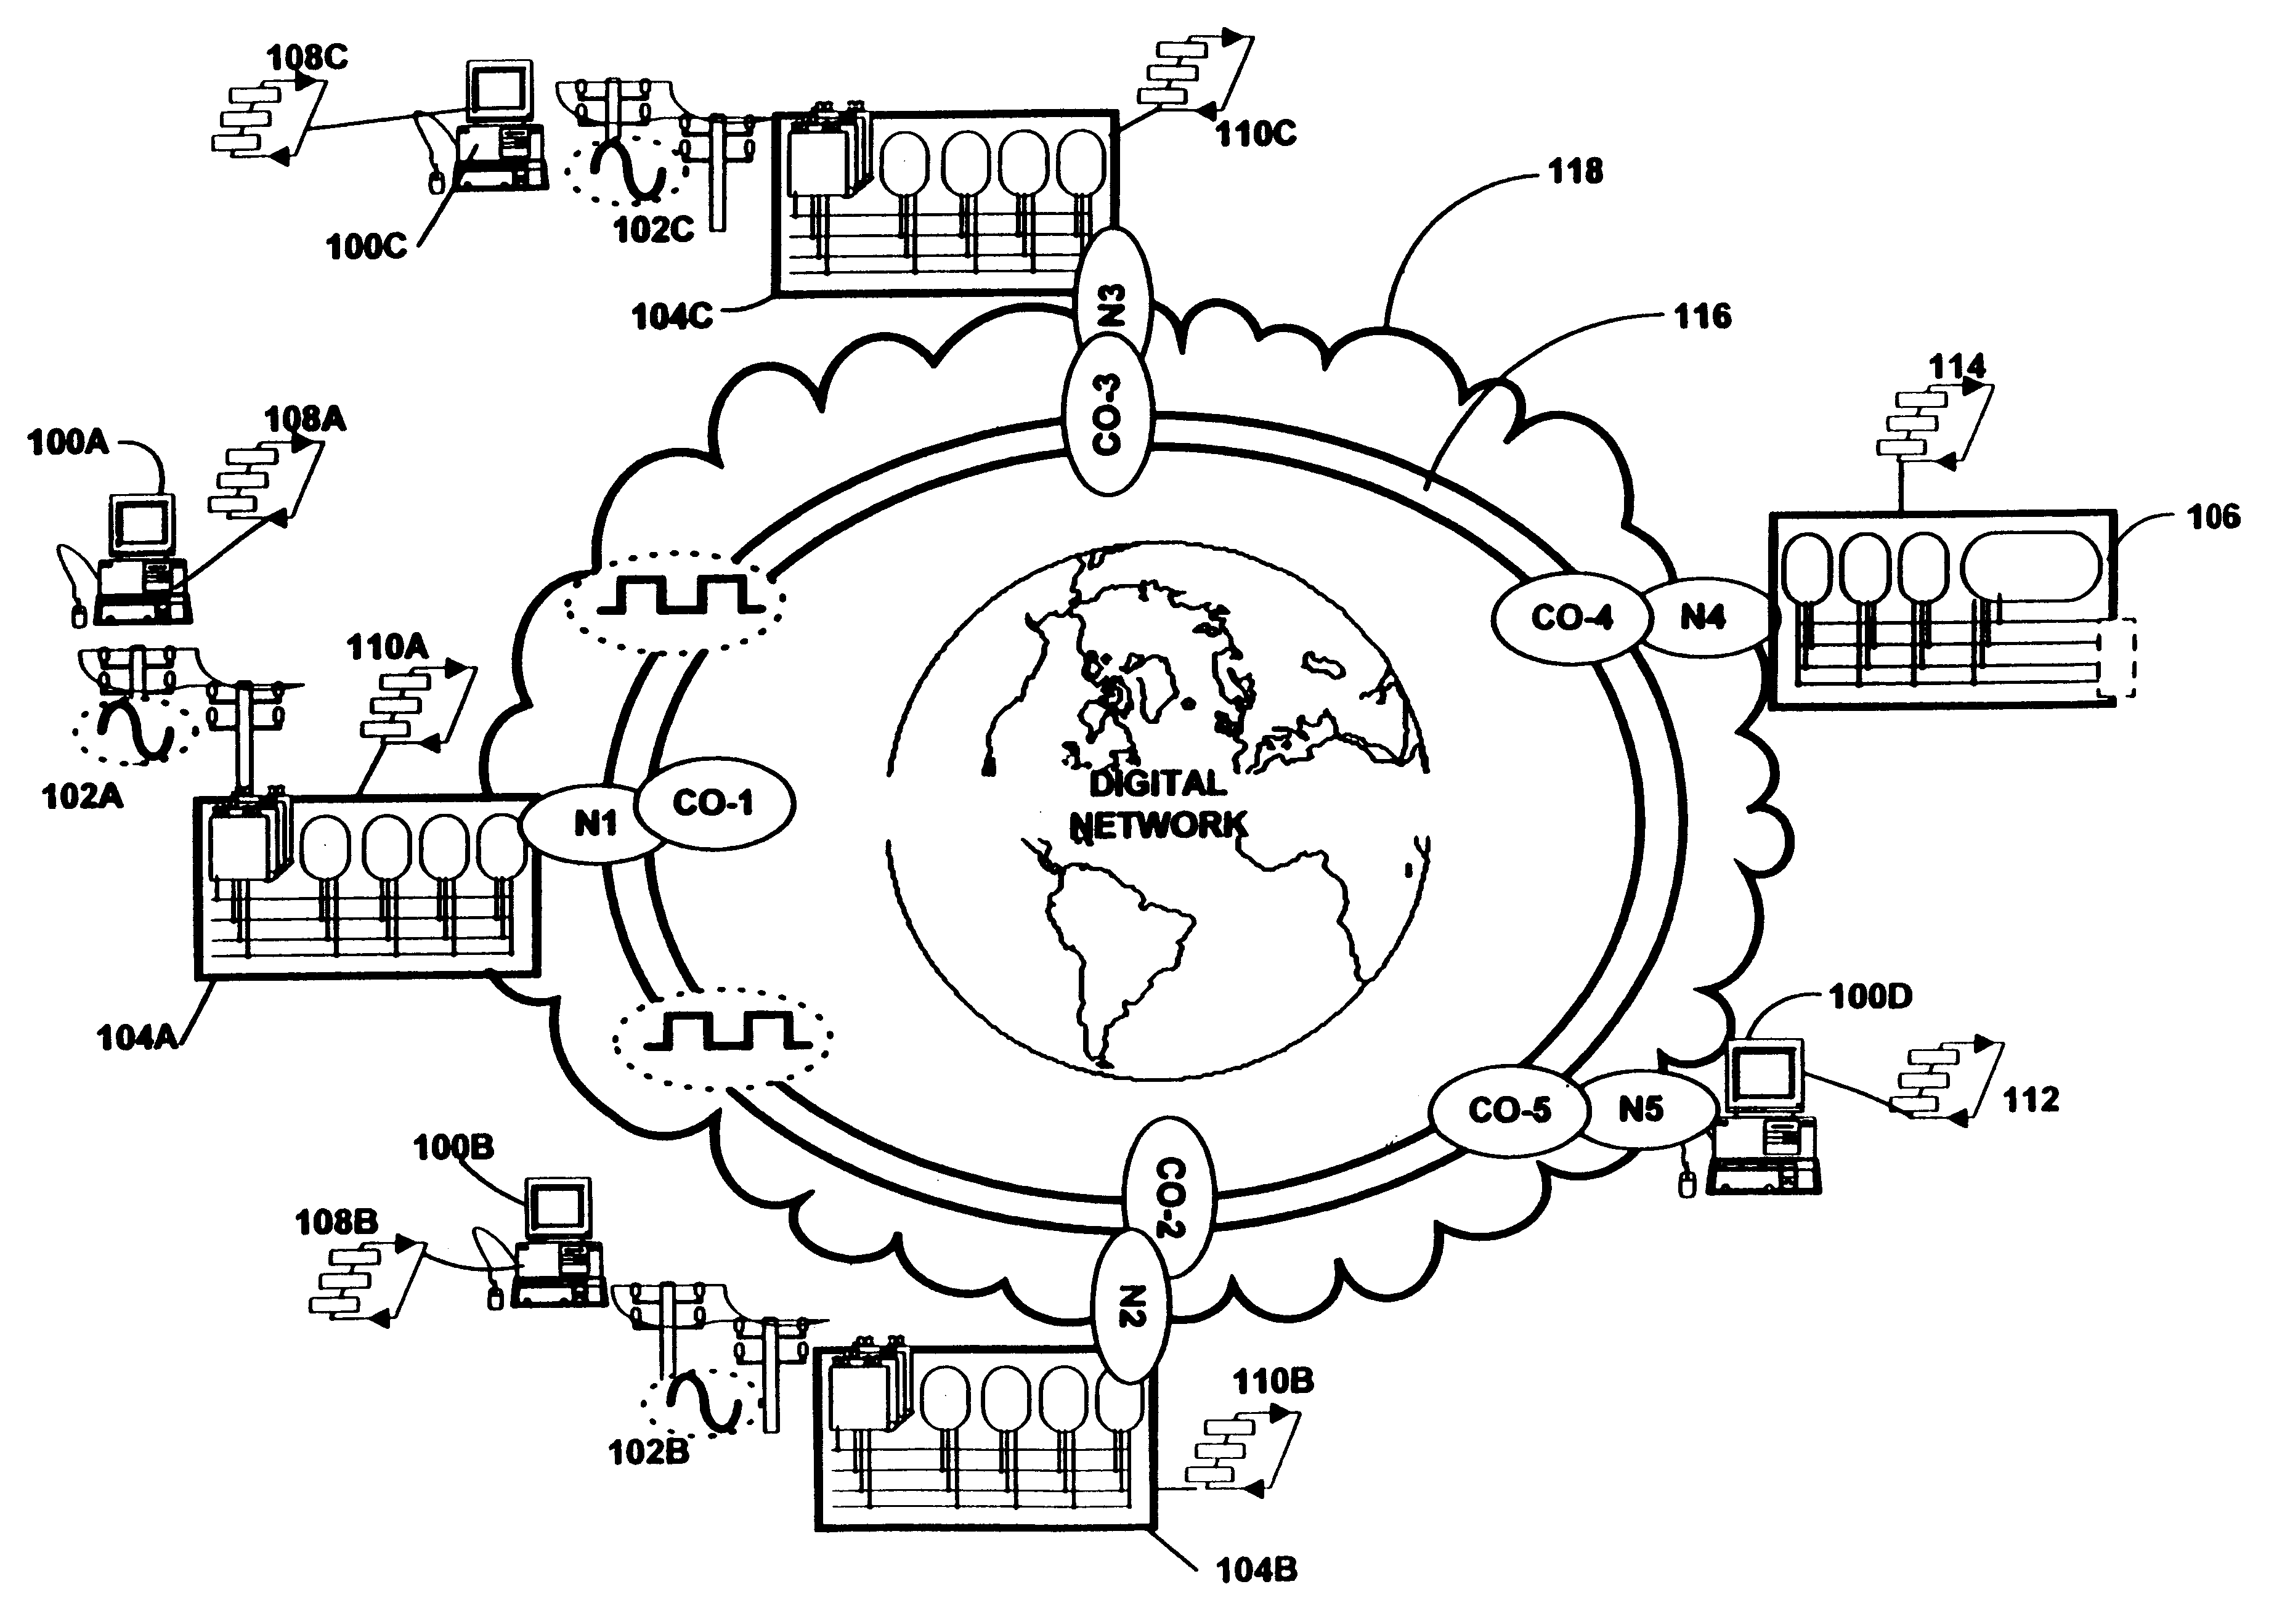 Method and apparatus for hierarchical management of subscriber link traffic on digital networks